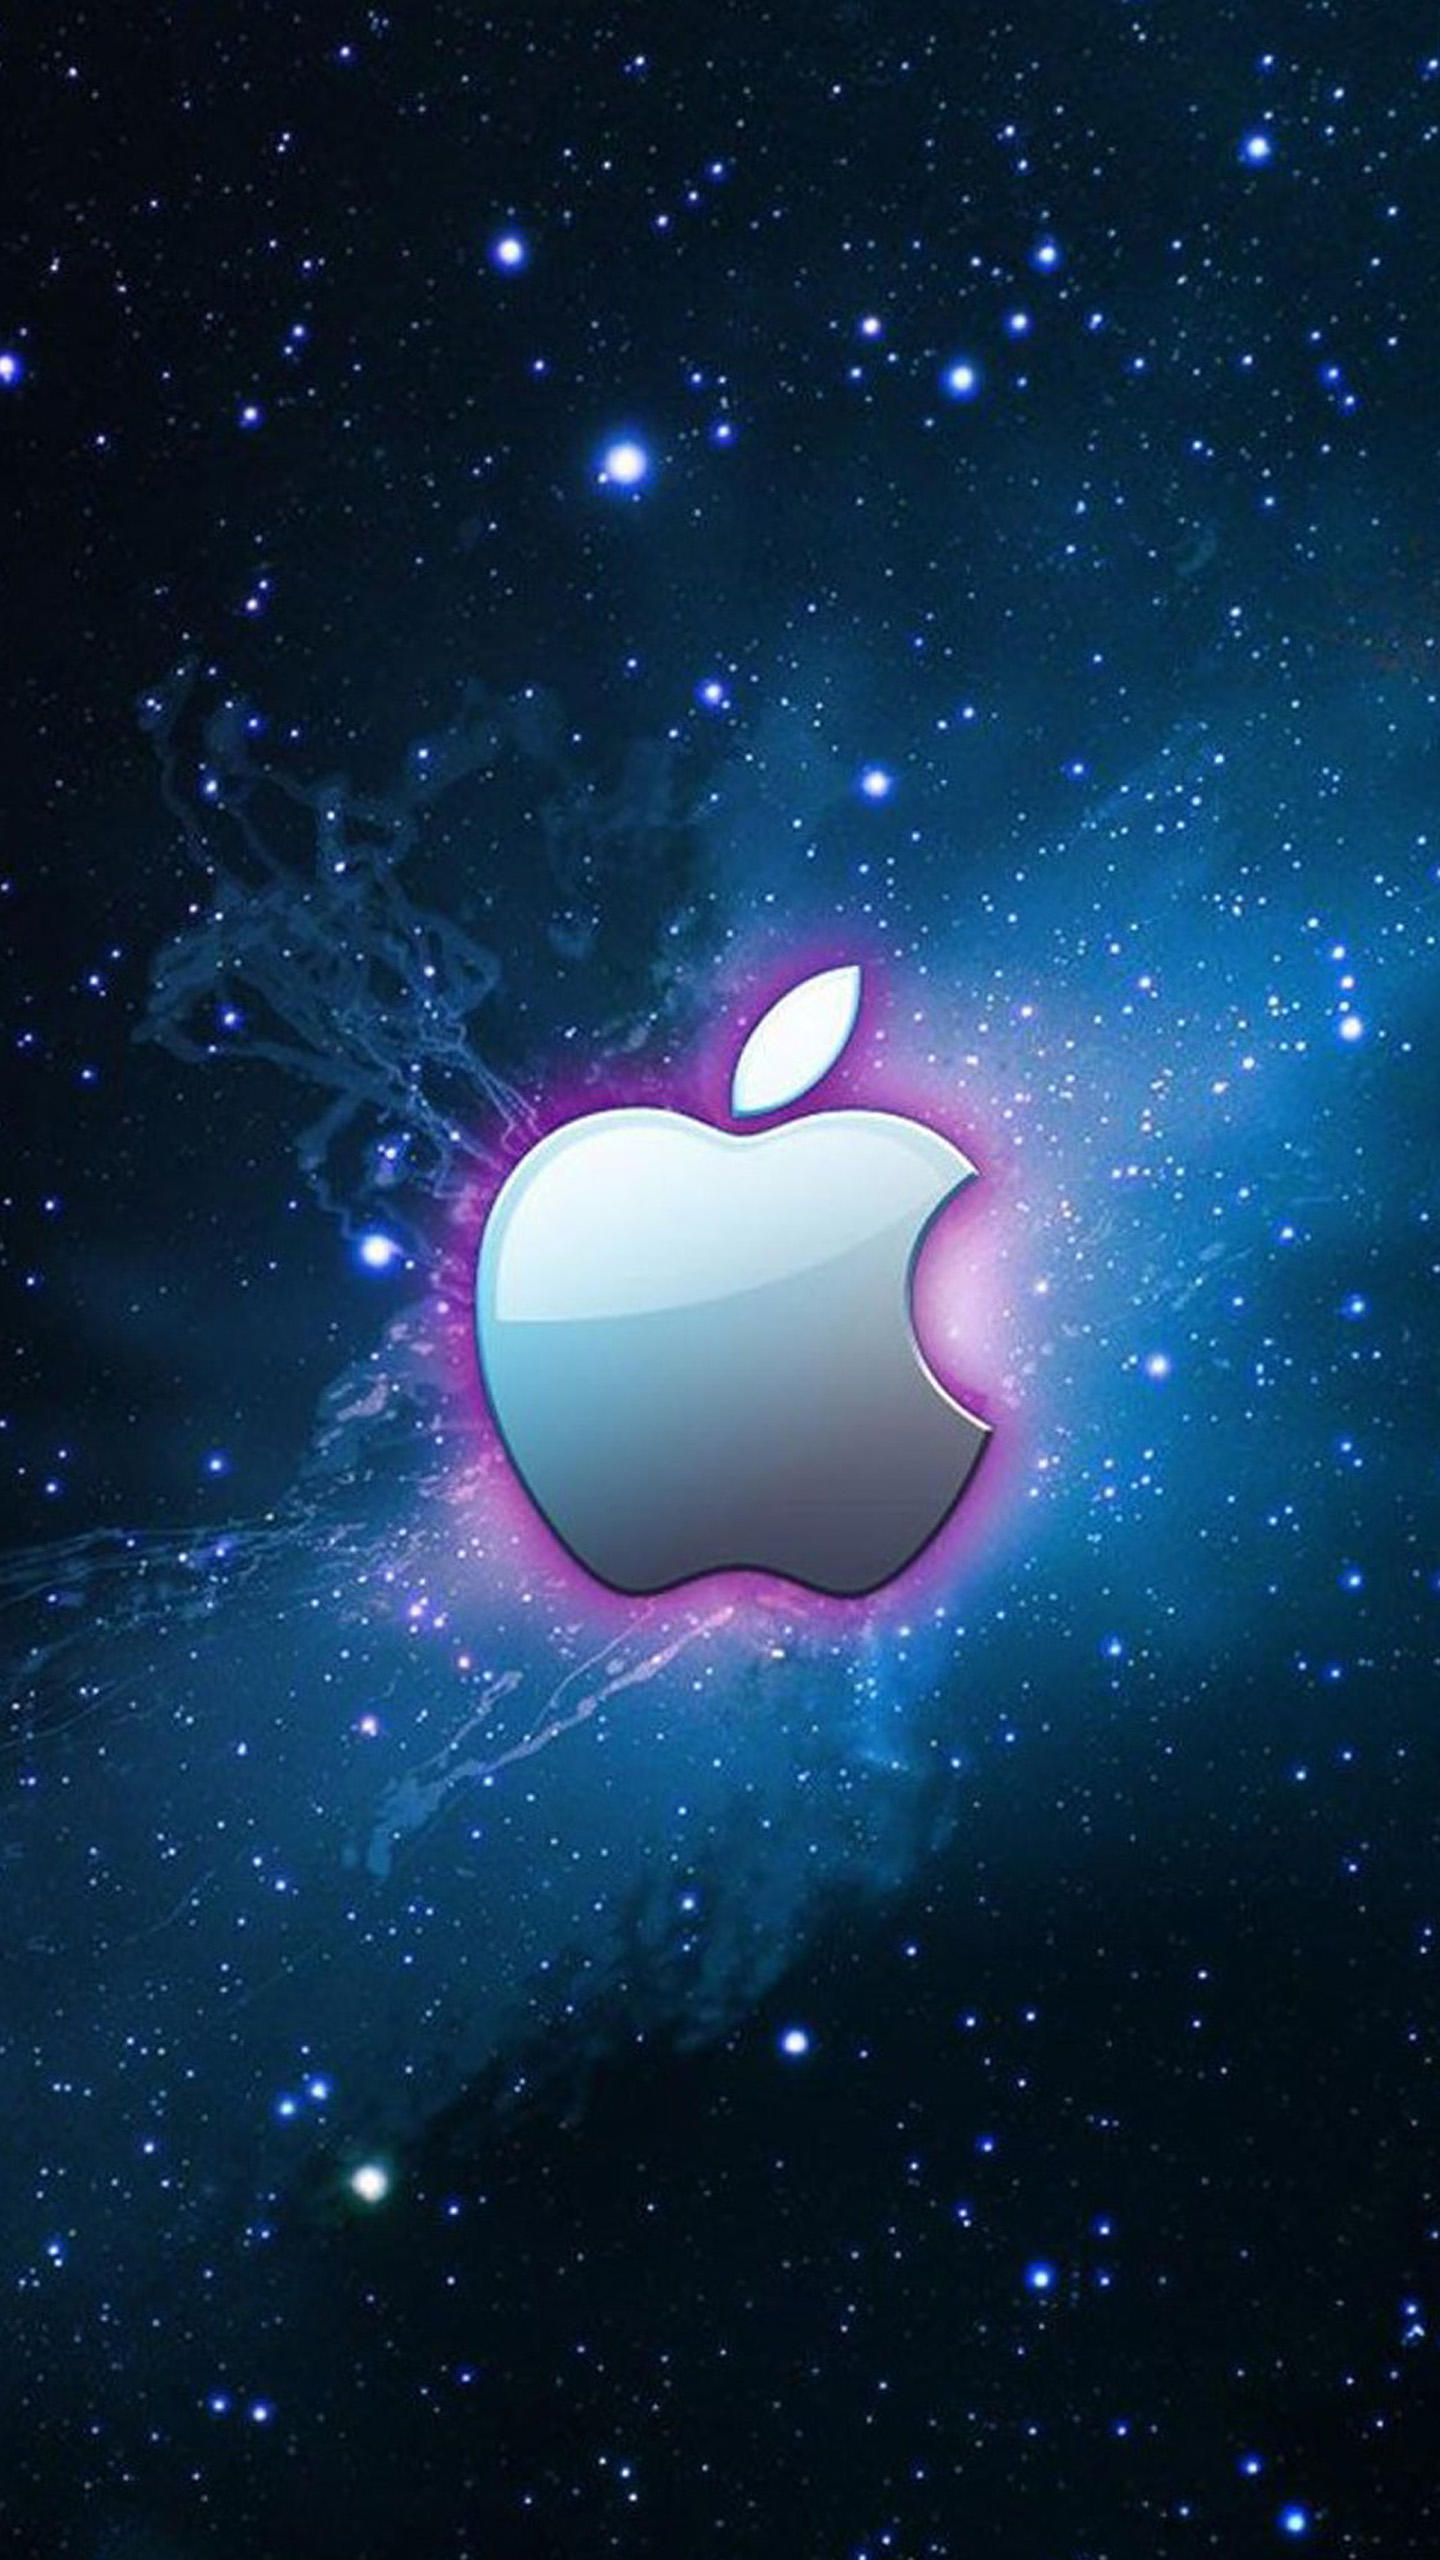 Awesome Apple logo 1 Galaxy S6 Wallpaper | Galaxy S6 Wallpapers